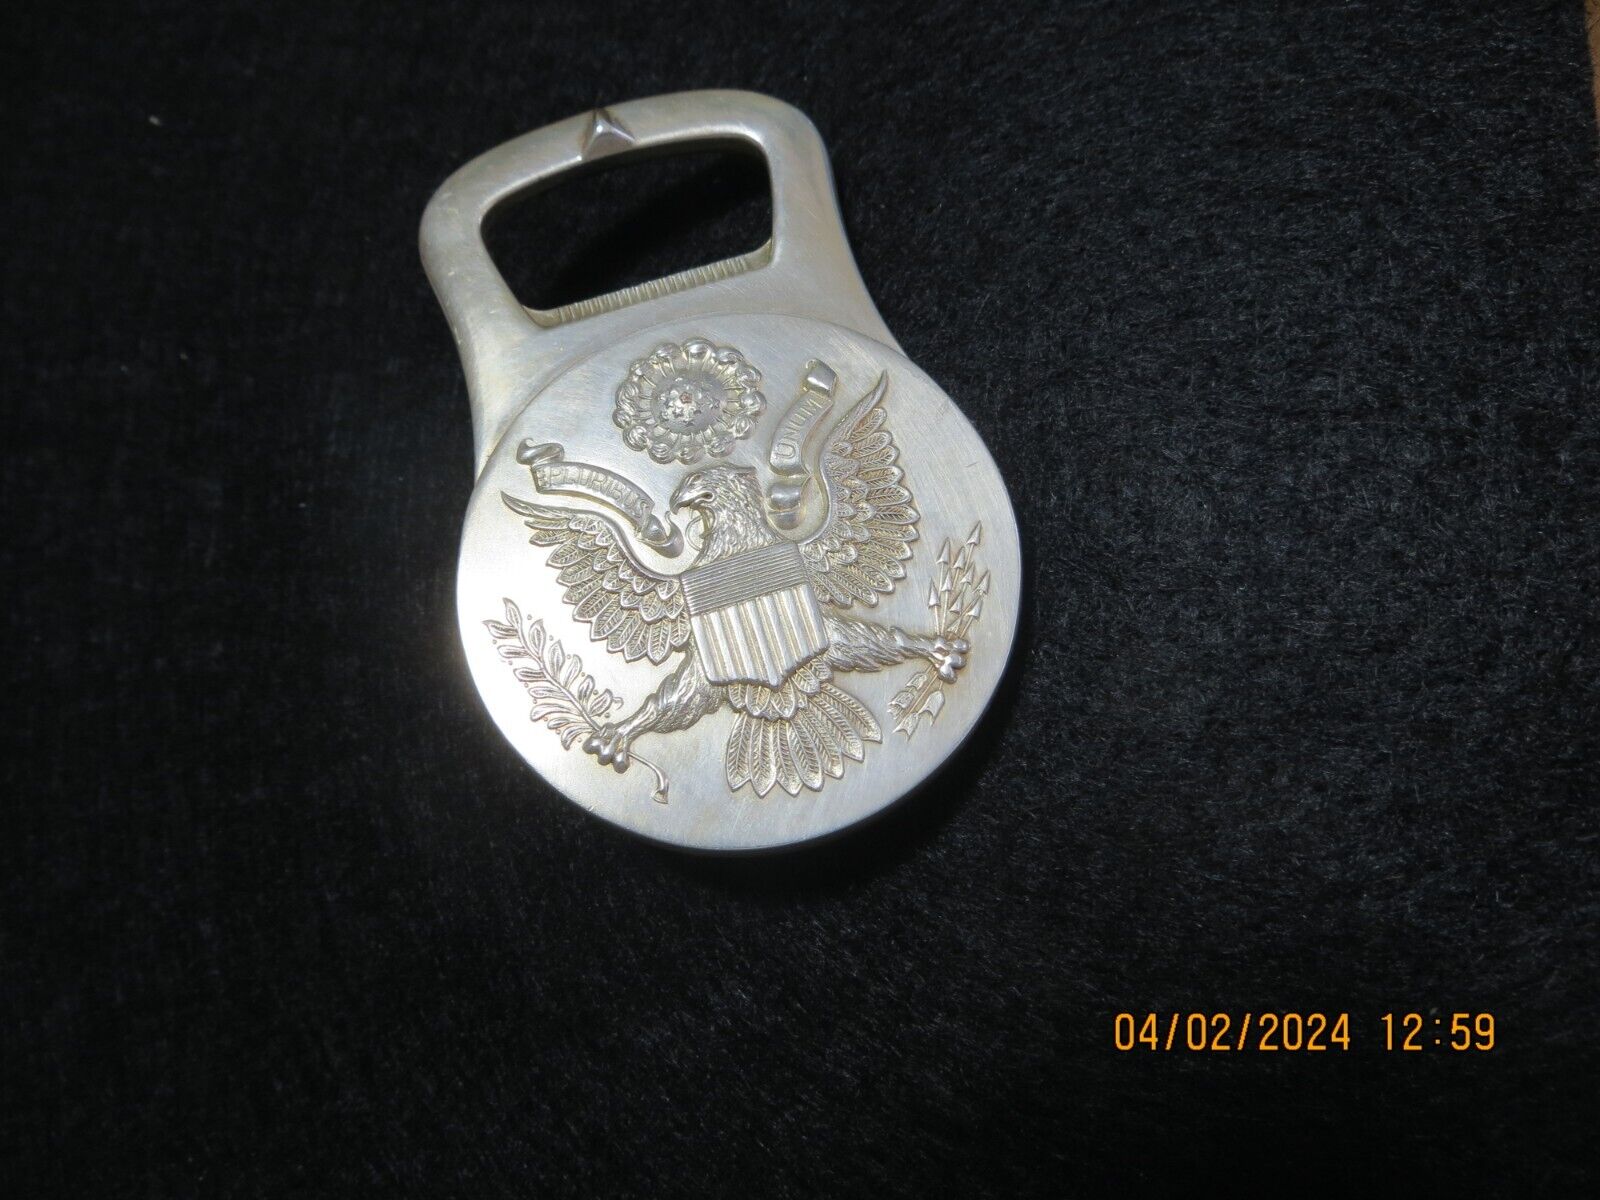 Christofle Bottle Opener Seal of the U.S.A.